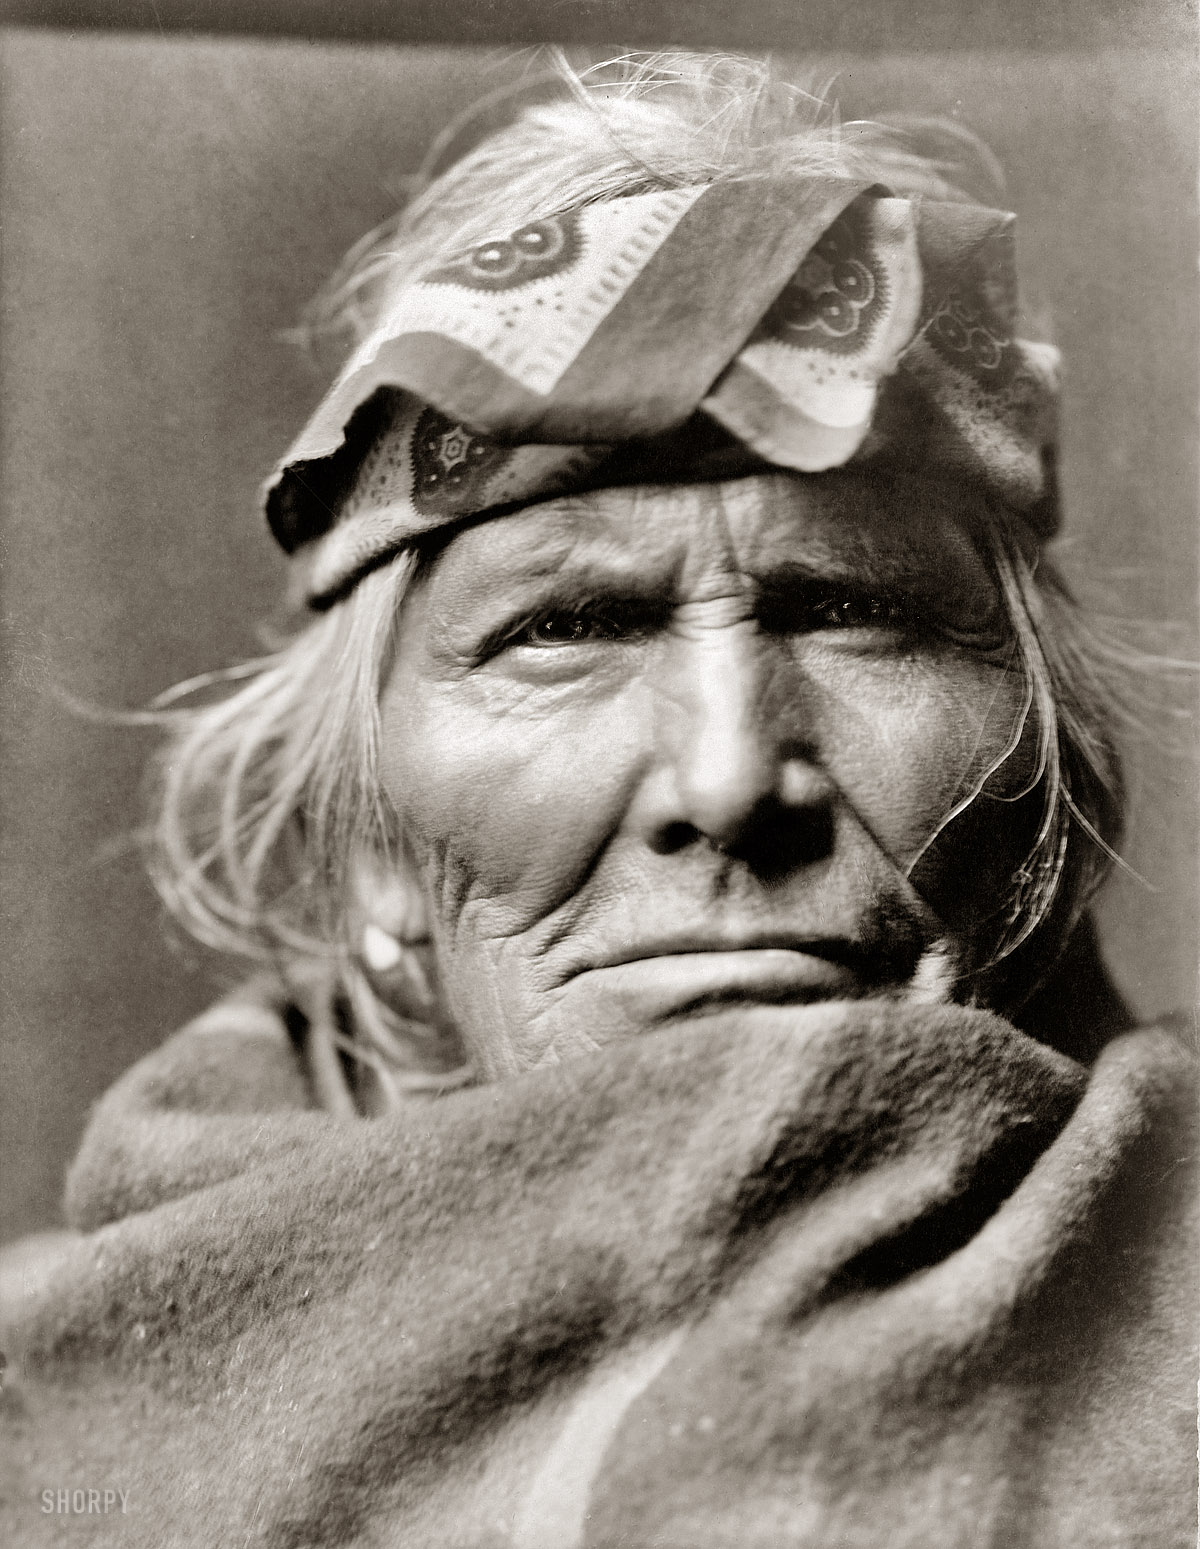 1903. The Zuni elder Si Wa Wata Wa. Who does not look like someone who put up with much nonsense. Photograph by Edward S. Curtis. View full size.